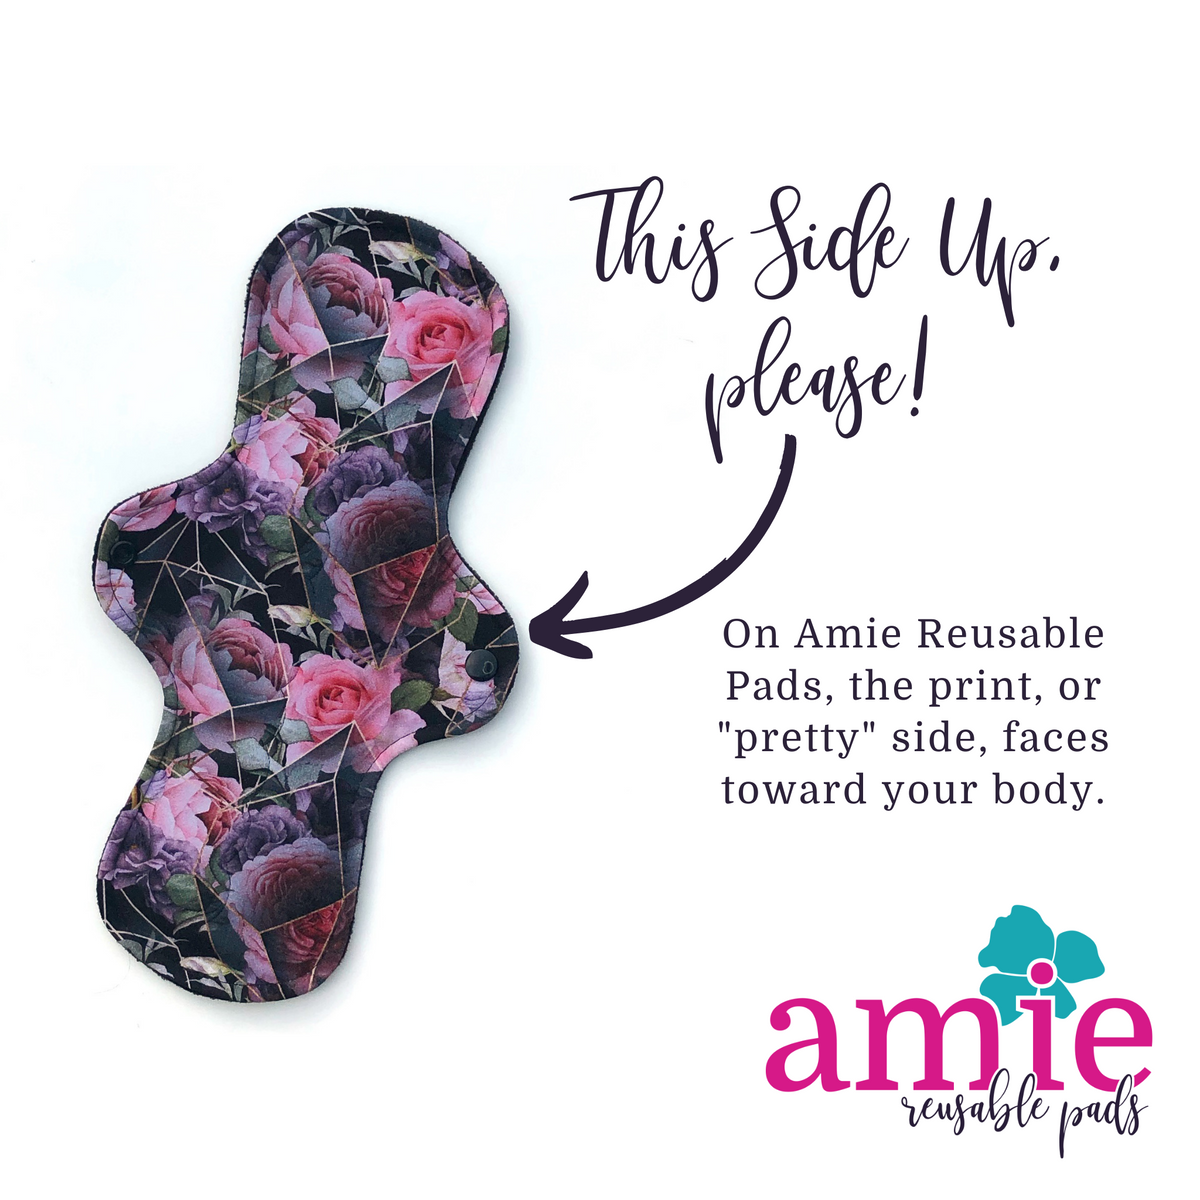 reusable pad with words this side up to indicate that on amie reusable pads the pretty or print side faces toward the body